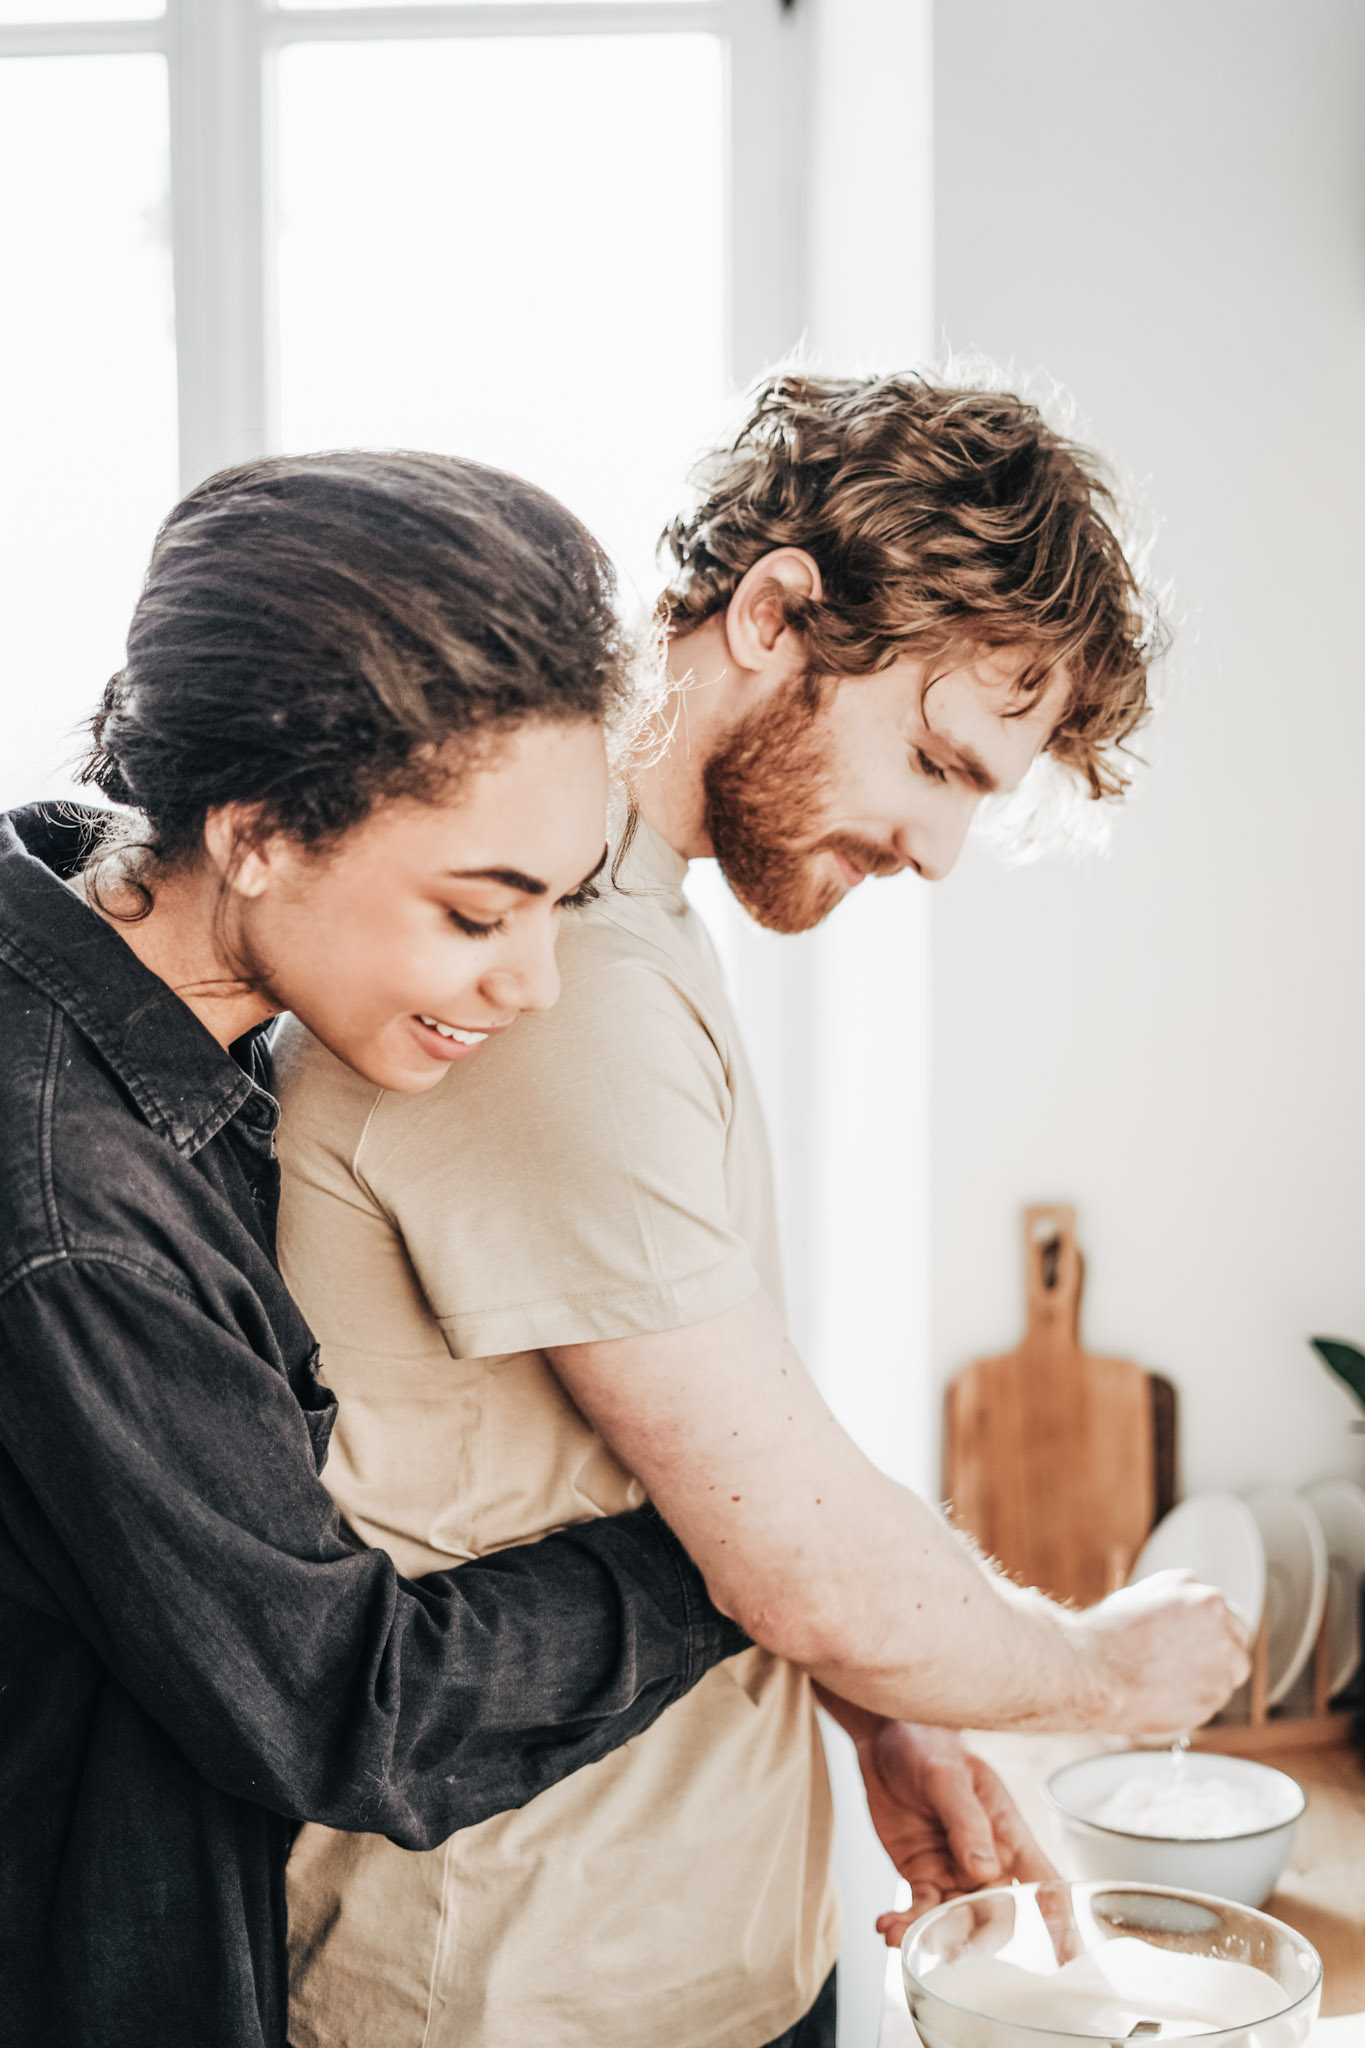 A woman and man embrace and cook together. The woman is hugging the man from behind while the man prepares food. This article covers romantic gourmet dinner ideas for a perfect Valentine's Day at home. 